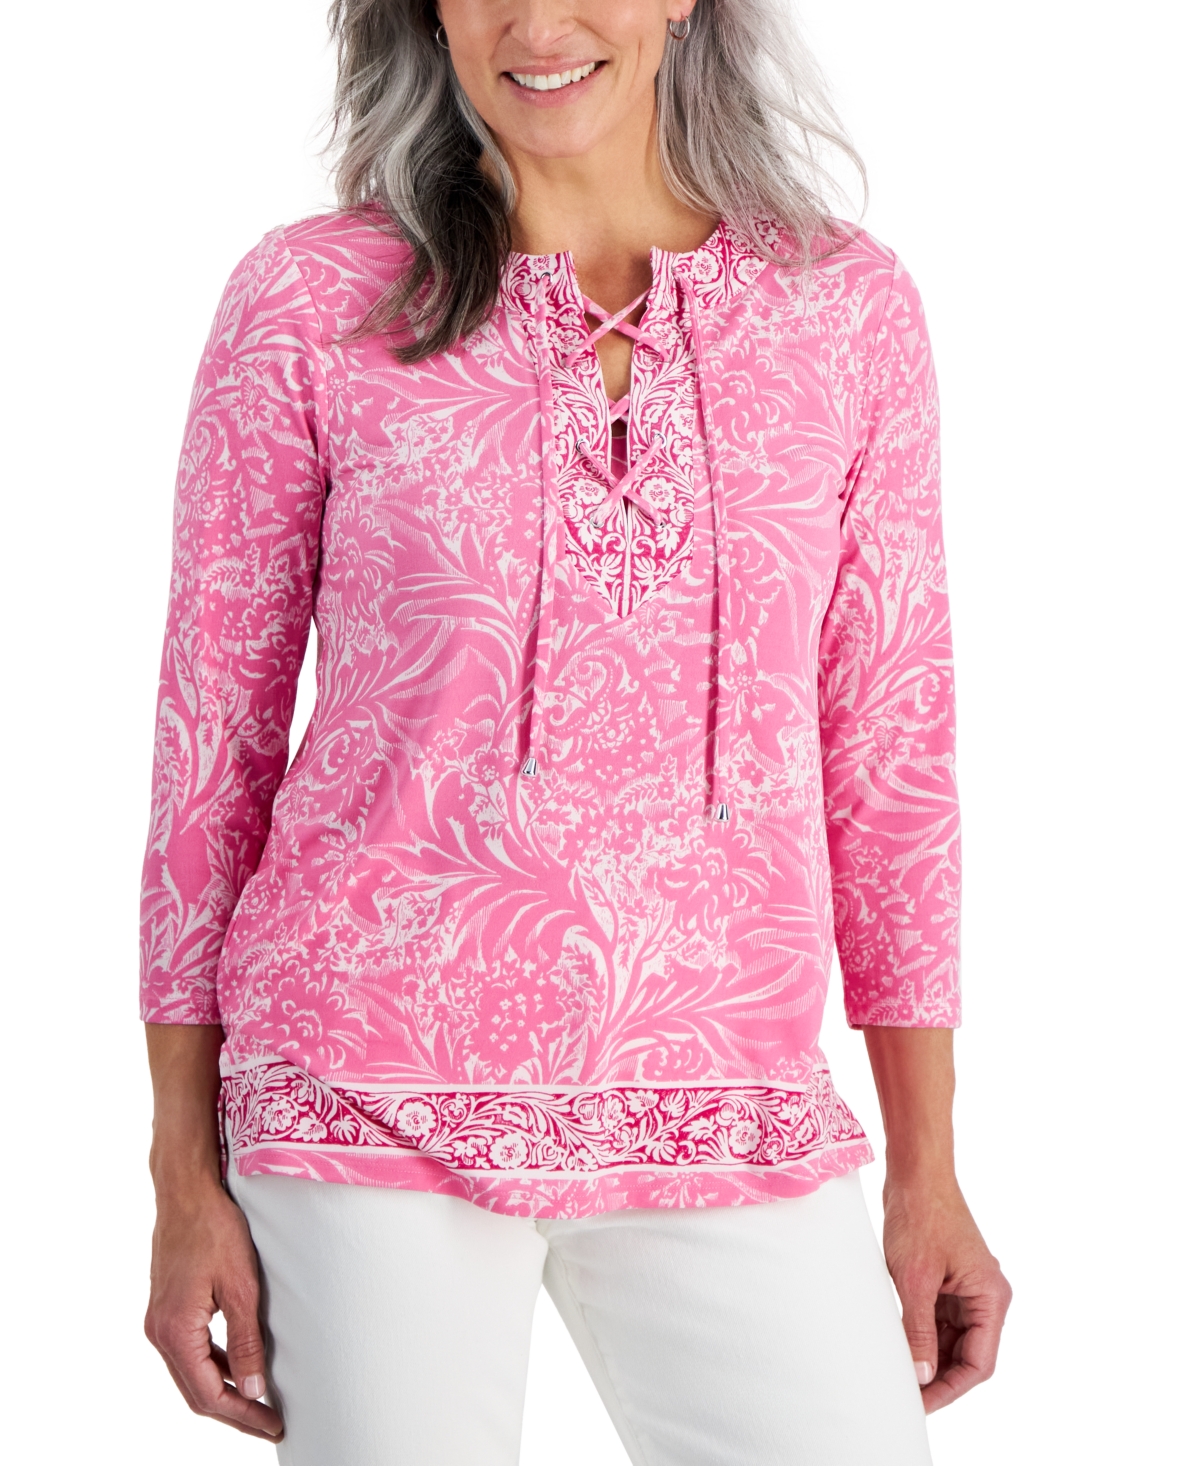 Petite Mixed-Print Lace-Up Knit Tunic, Created for Macy's - Phlox Pink Combo